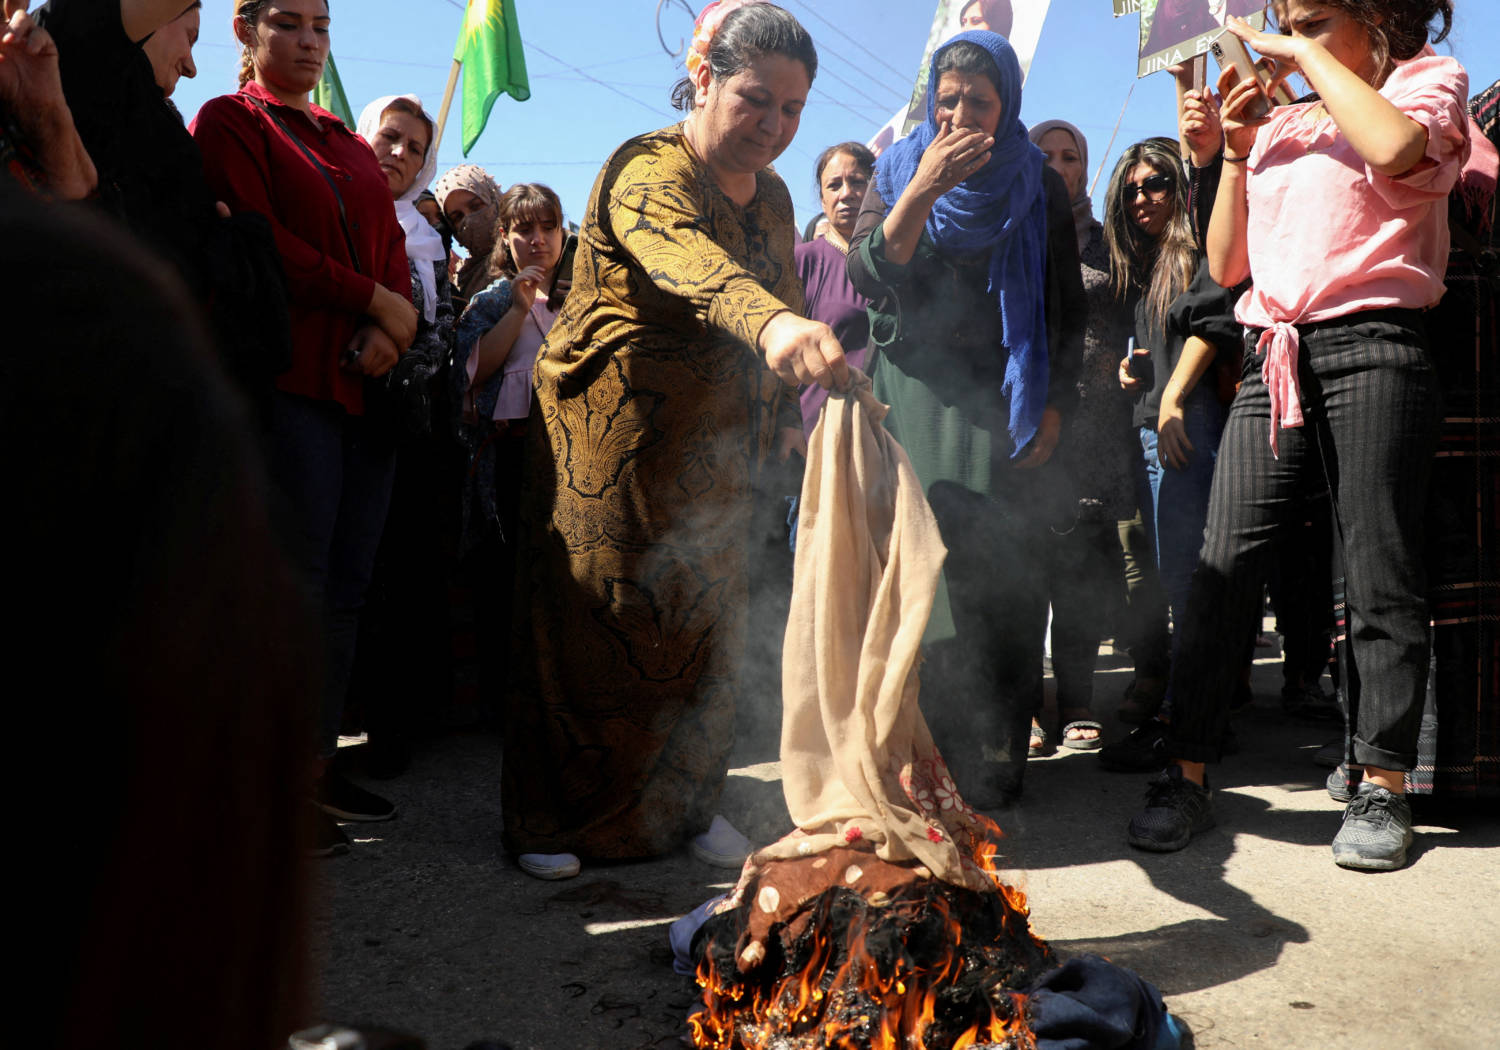 Women Burn Headscarves During A Protest Over The Death Of Mahsa Amini In Iran, In The Kurdish Controlled City Of Qamishli